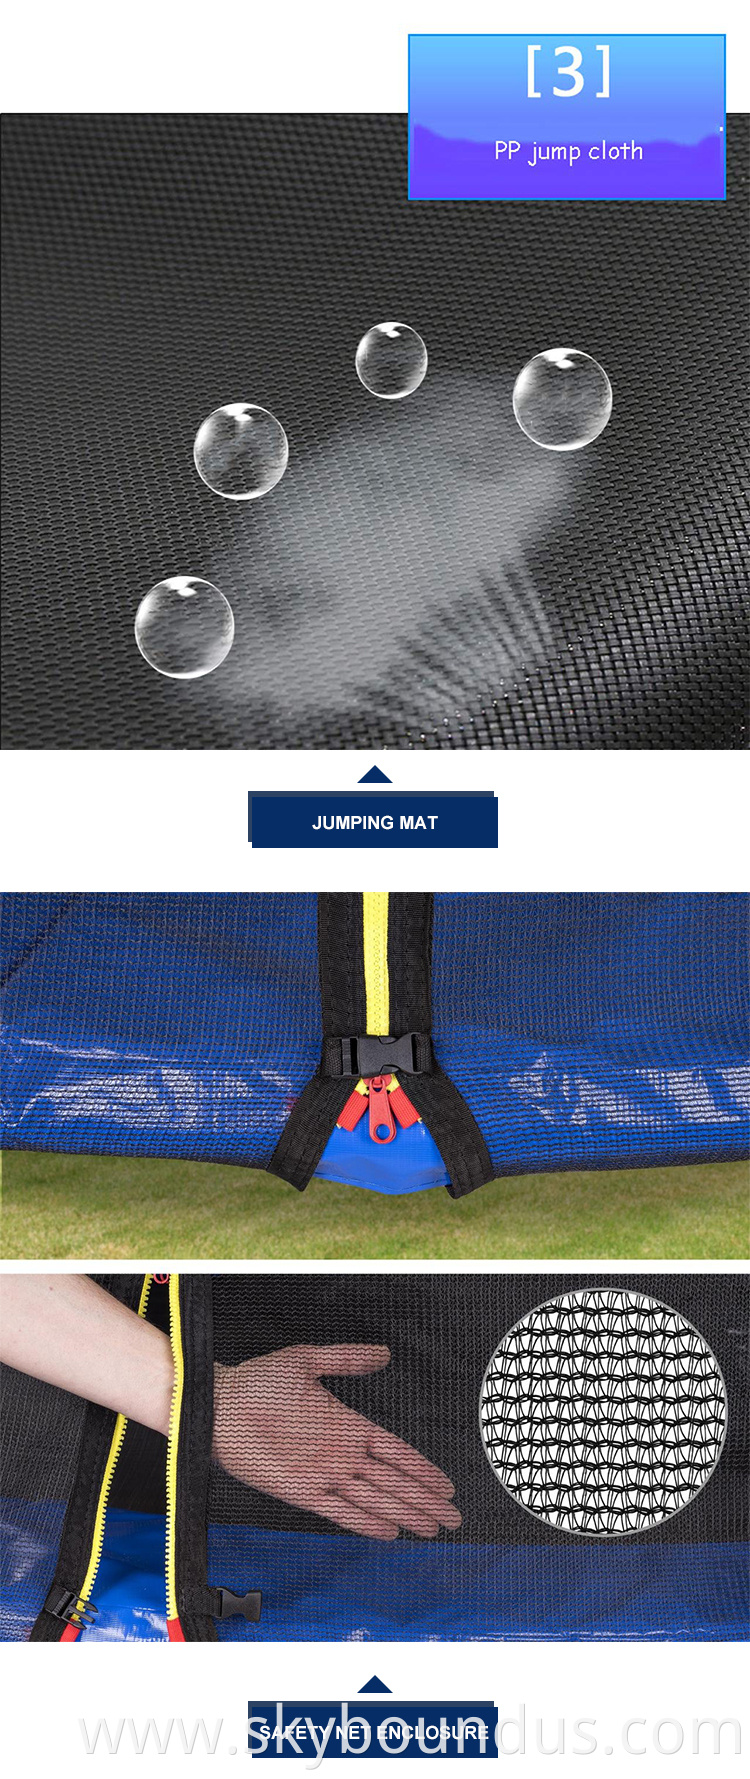 8X10FT trampoline rectangle trampoline with safety net